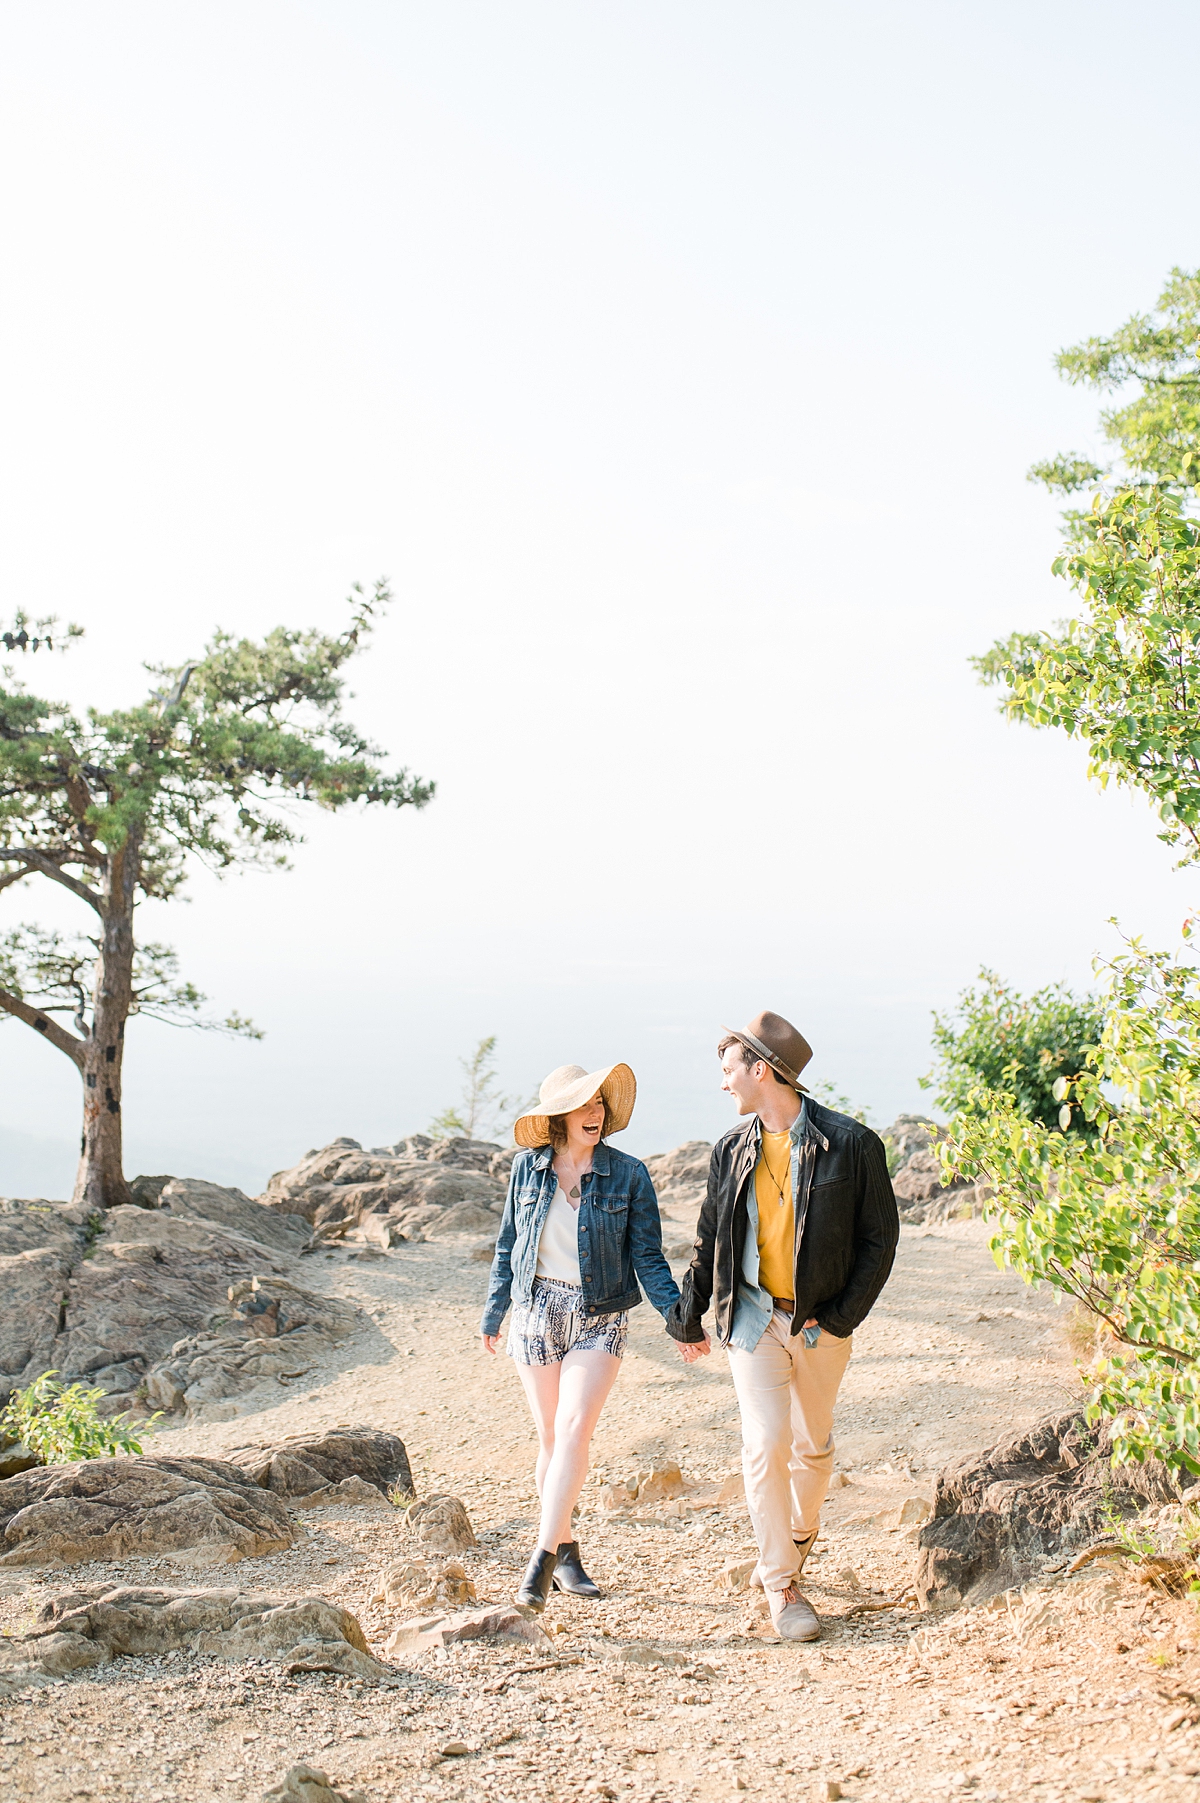 A Fun Raven's Roost Overlook Engagement Session with Mountain Views.